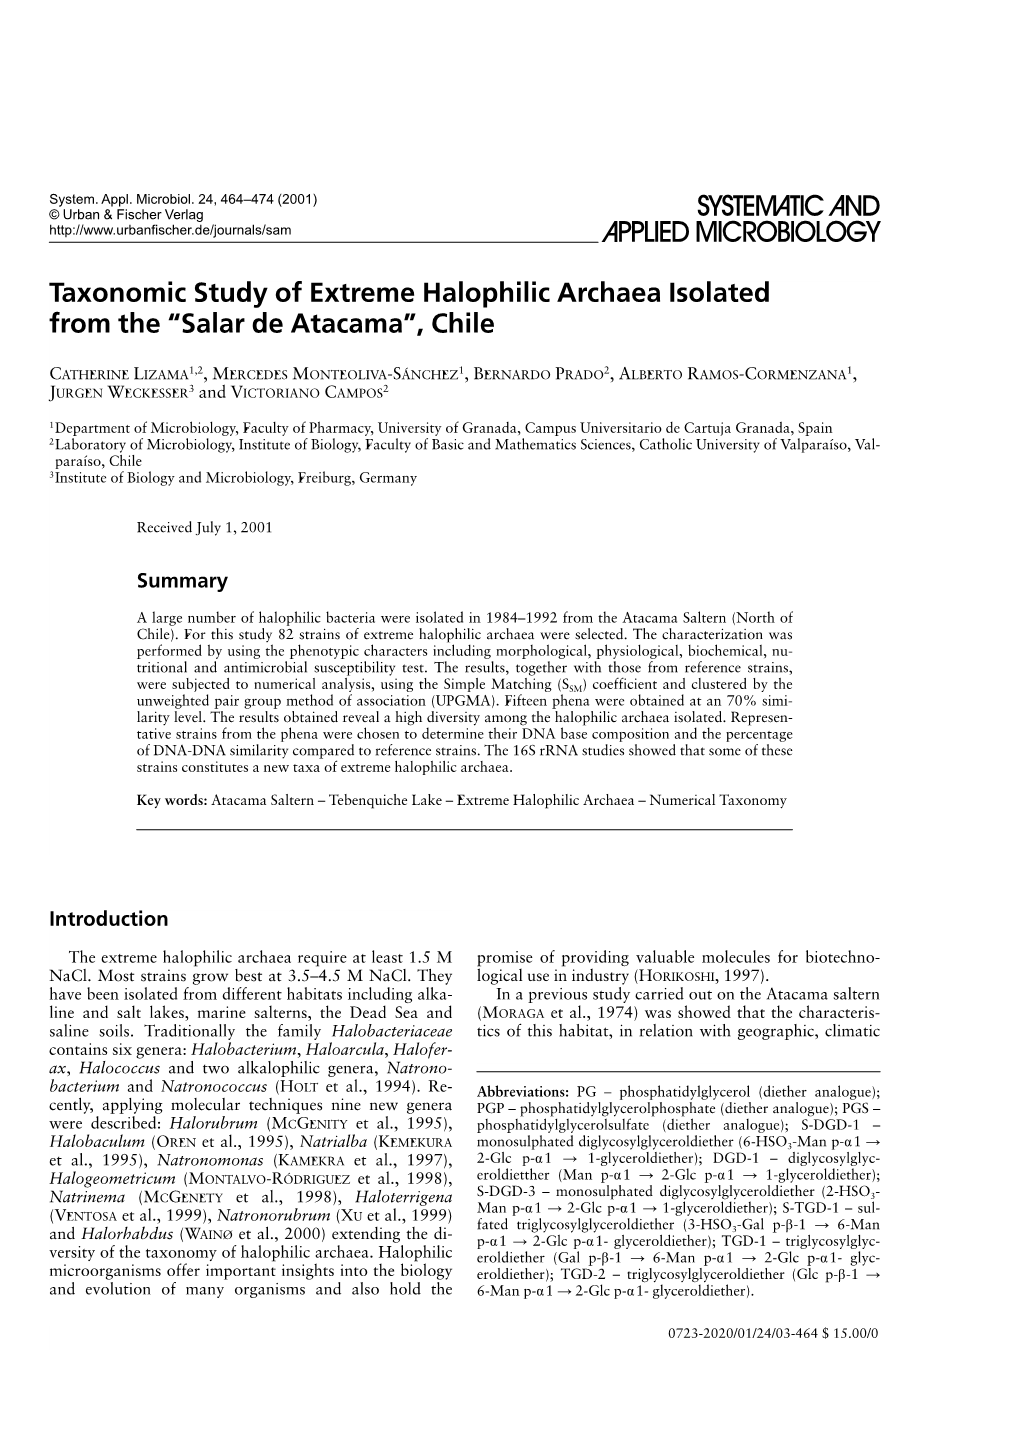 Taxonomic Study of Extreme Halophilic Archaea Isolated from the “Salar De Atacama”, Chile